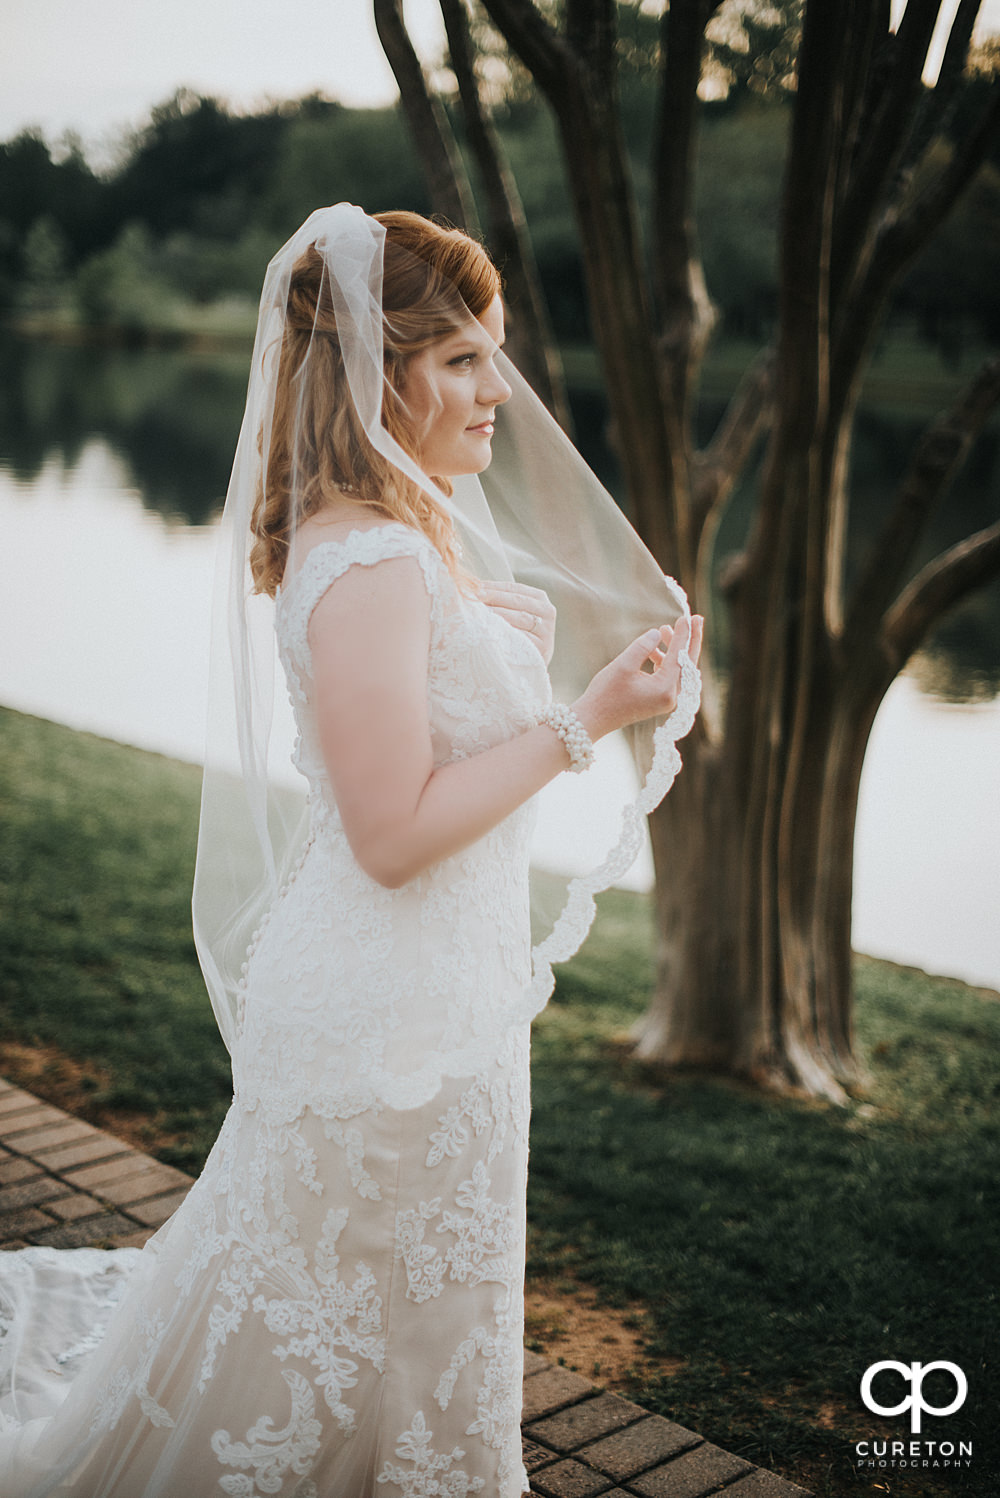 Bride looking out at the lake at Furman during her bridal session.